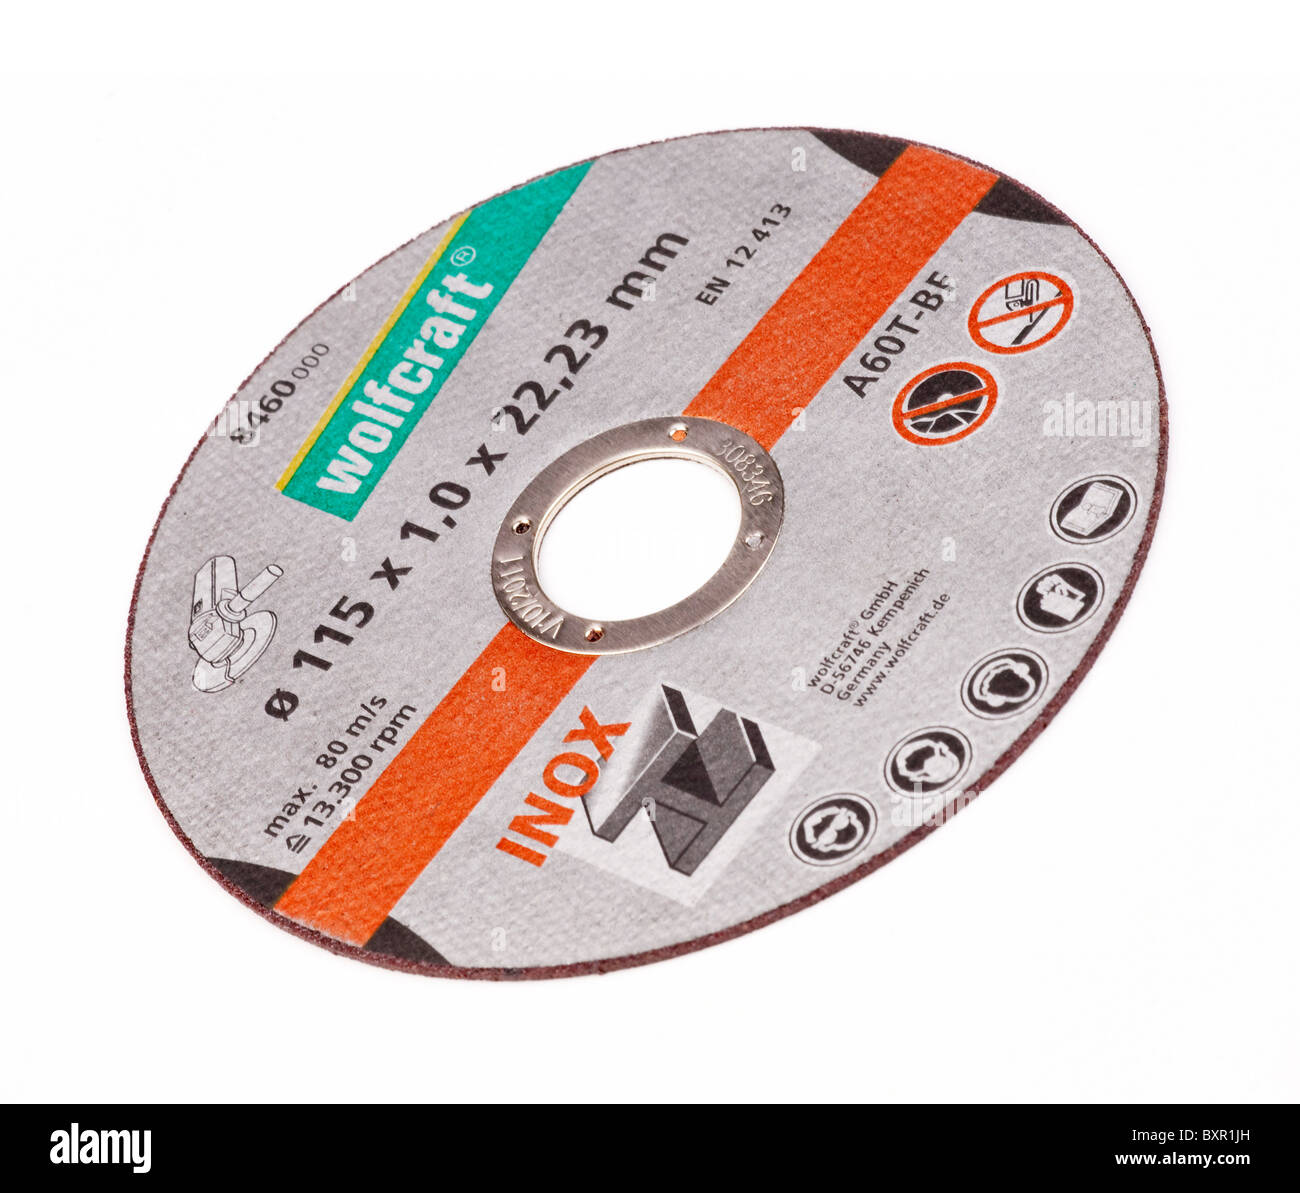 115mm 4.5' cutting / grinding abrasive disc Stock Photo